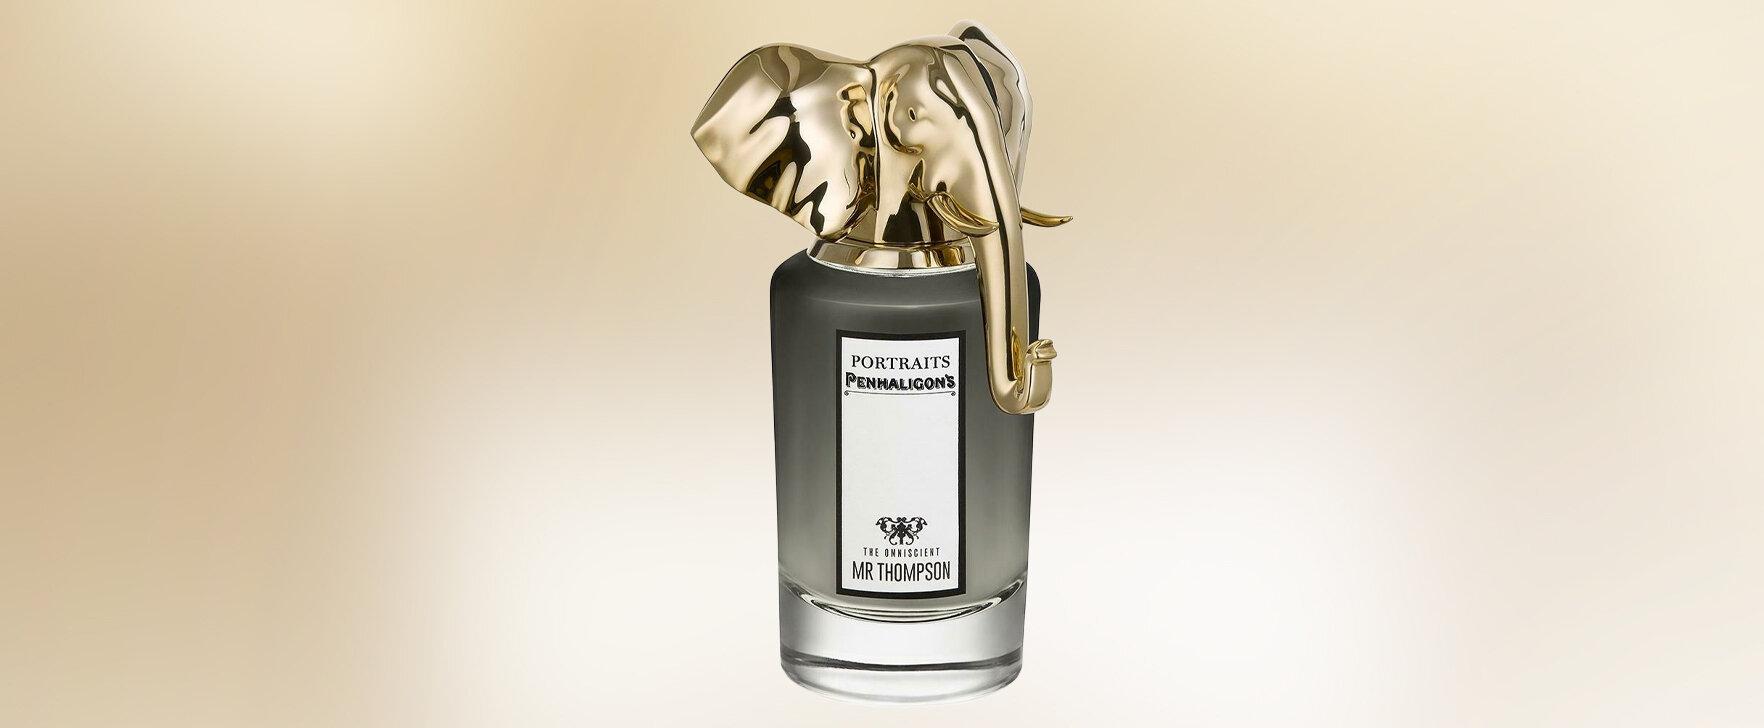 Mysterious and Elegant: The New Masculine Fragrance Portraits - The Omniscient Mister Thompson by Penhaligon's